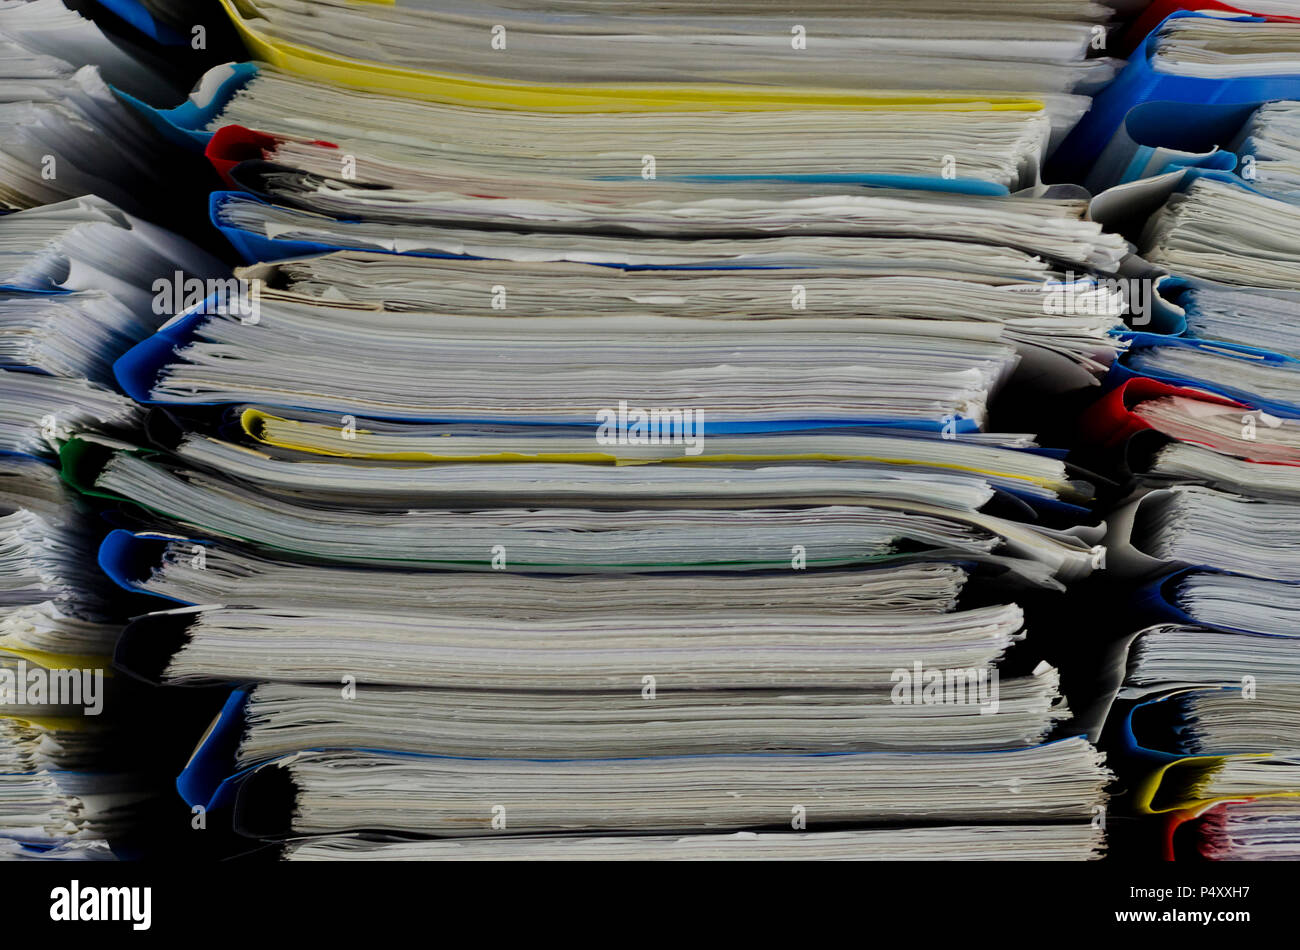 Extremely close up the stacking of office working documents Stock Photo